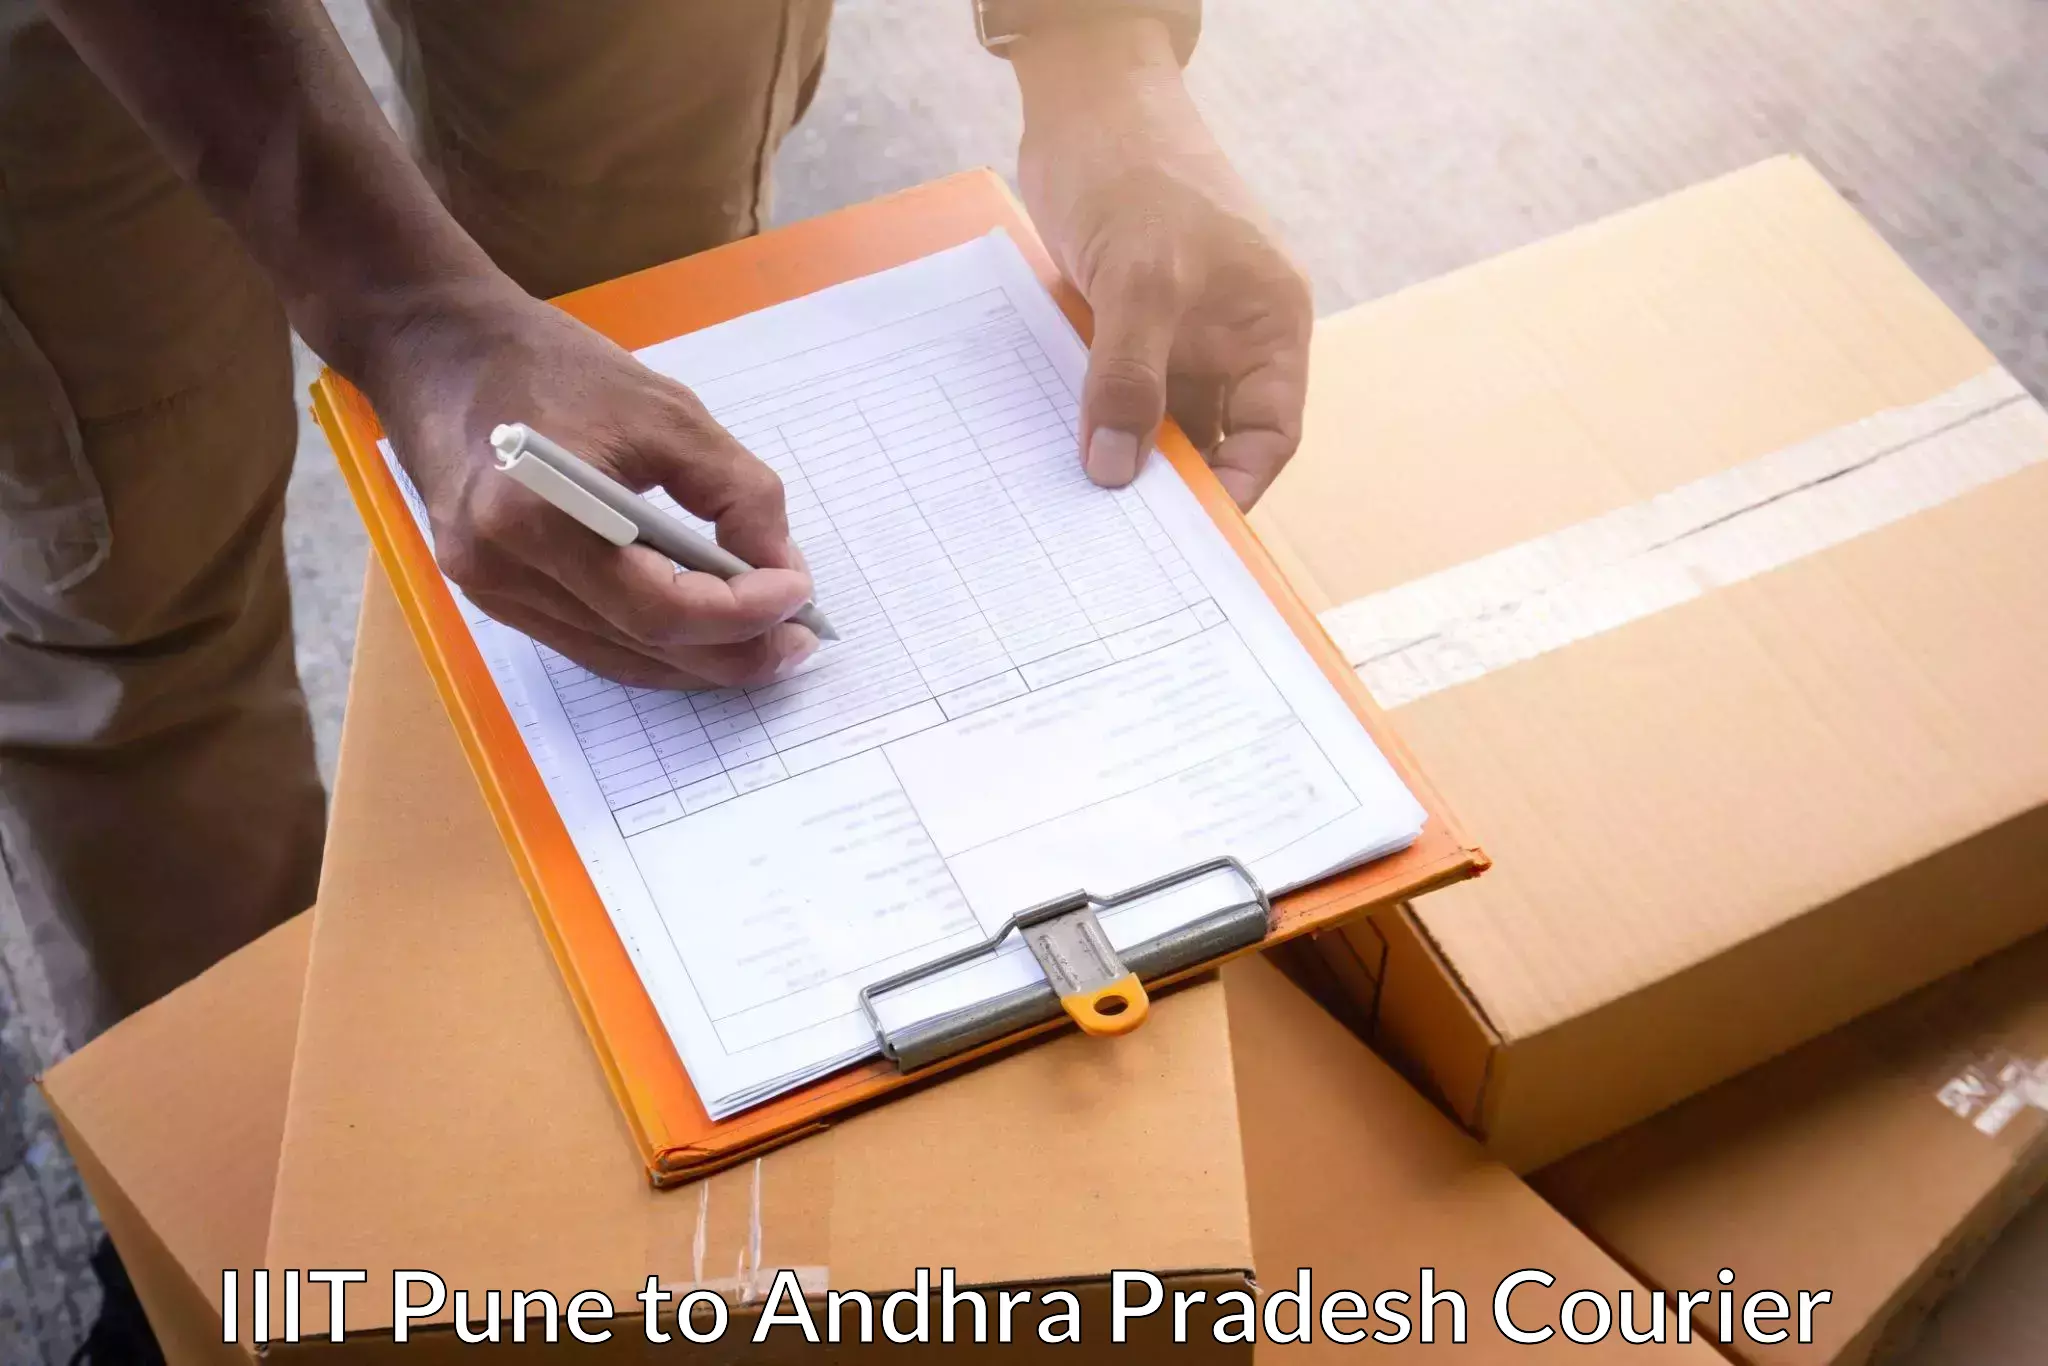 Custom courier packaging IIIT Pune to Dhone